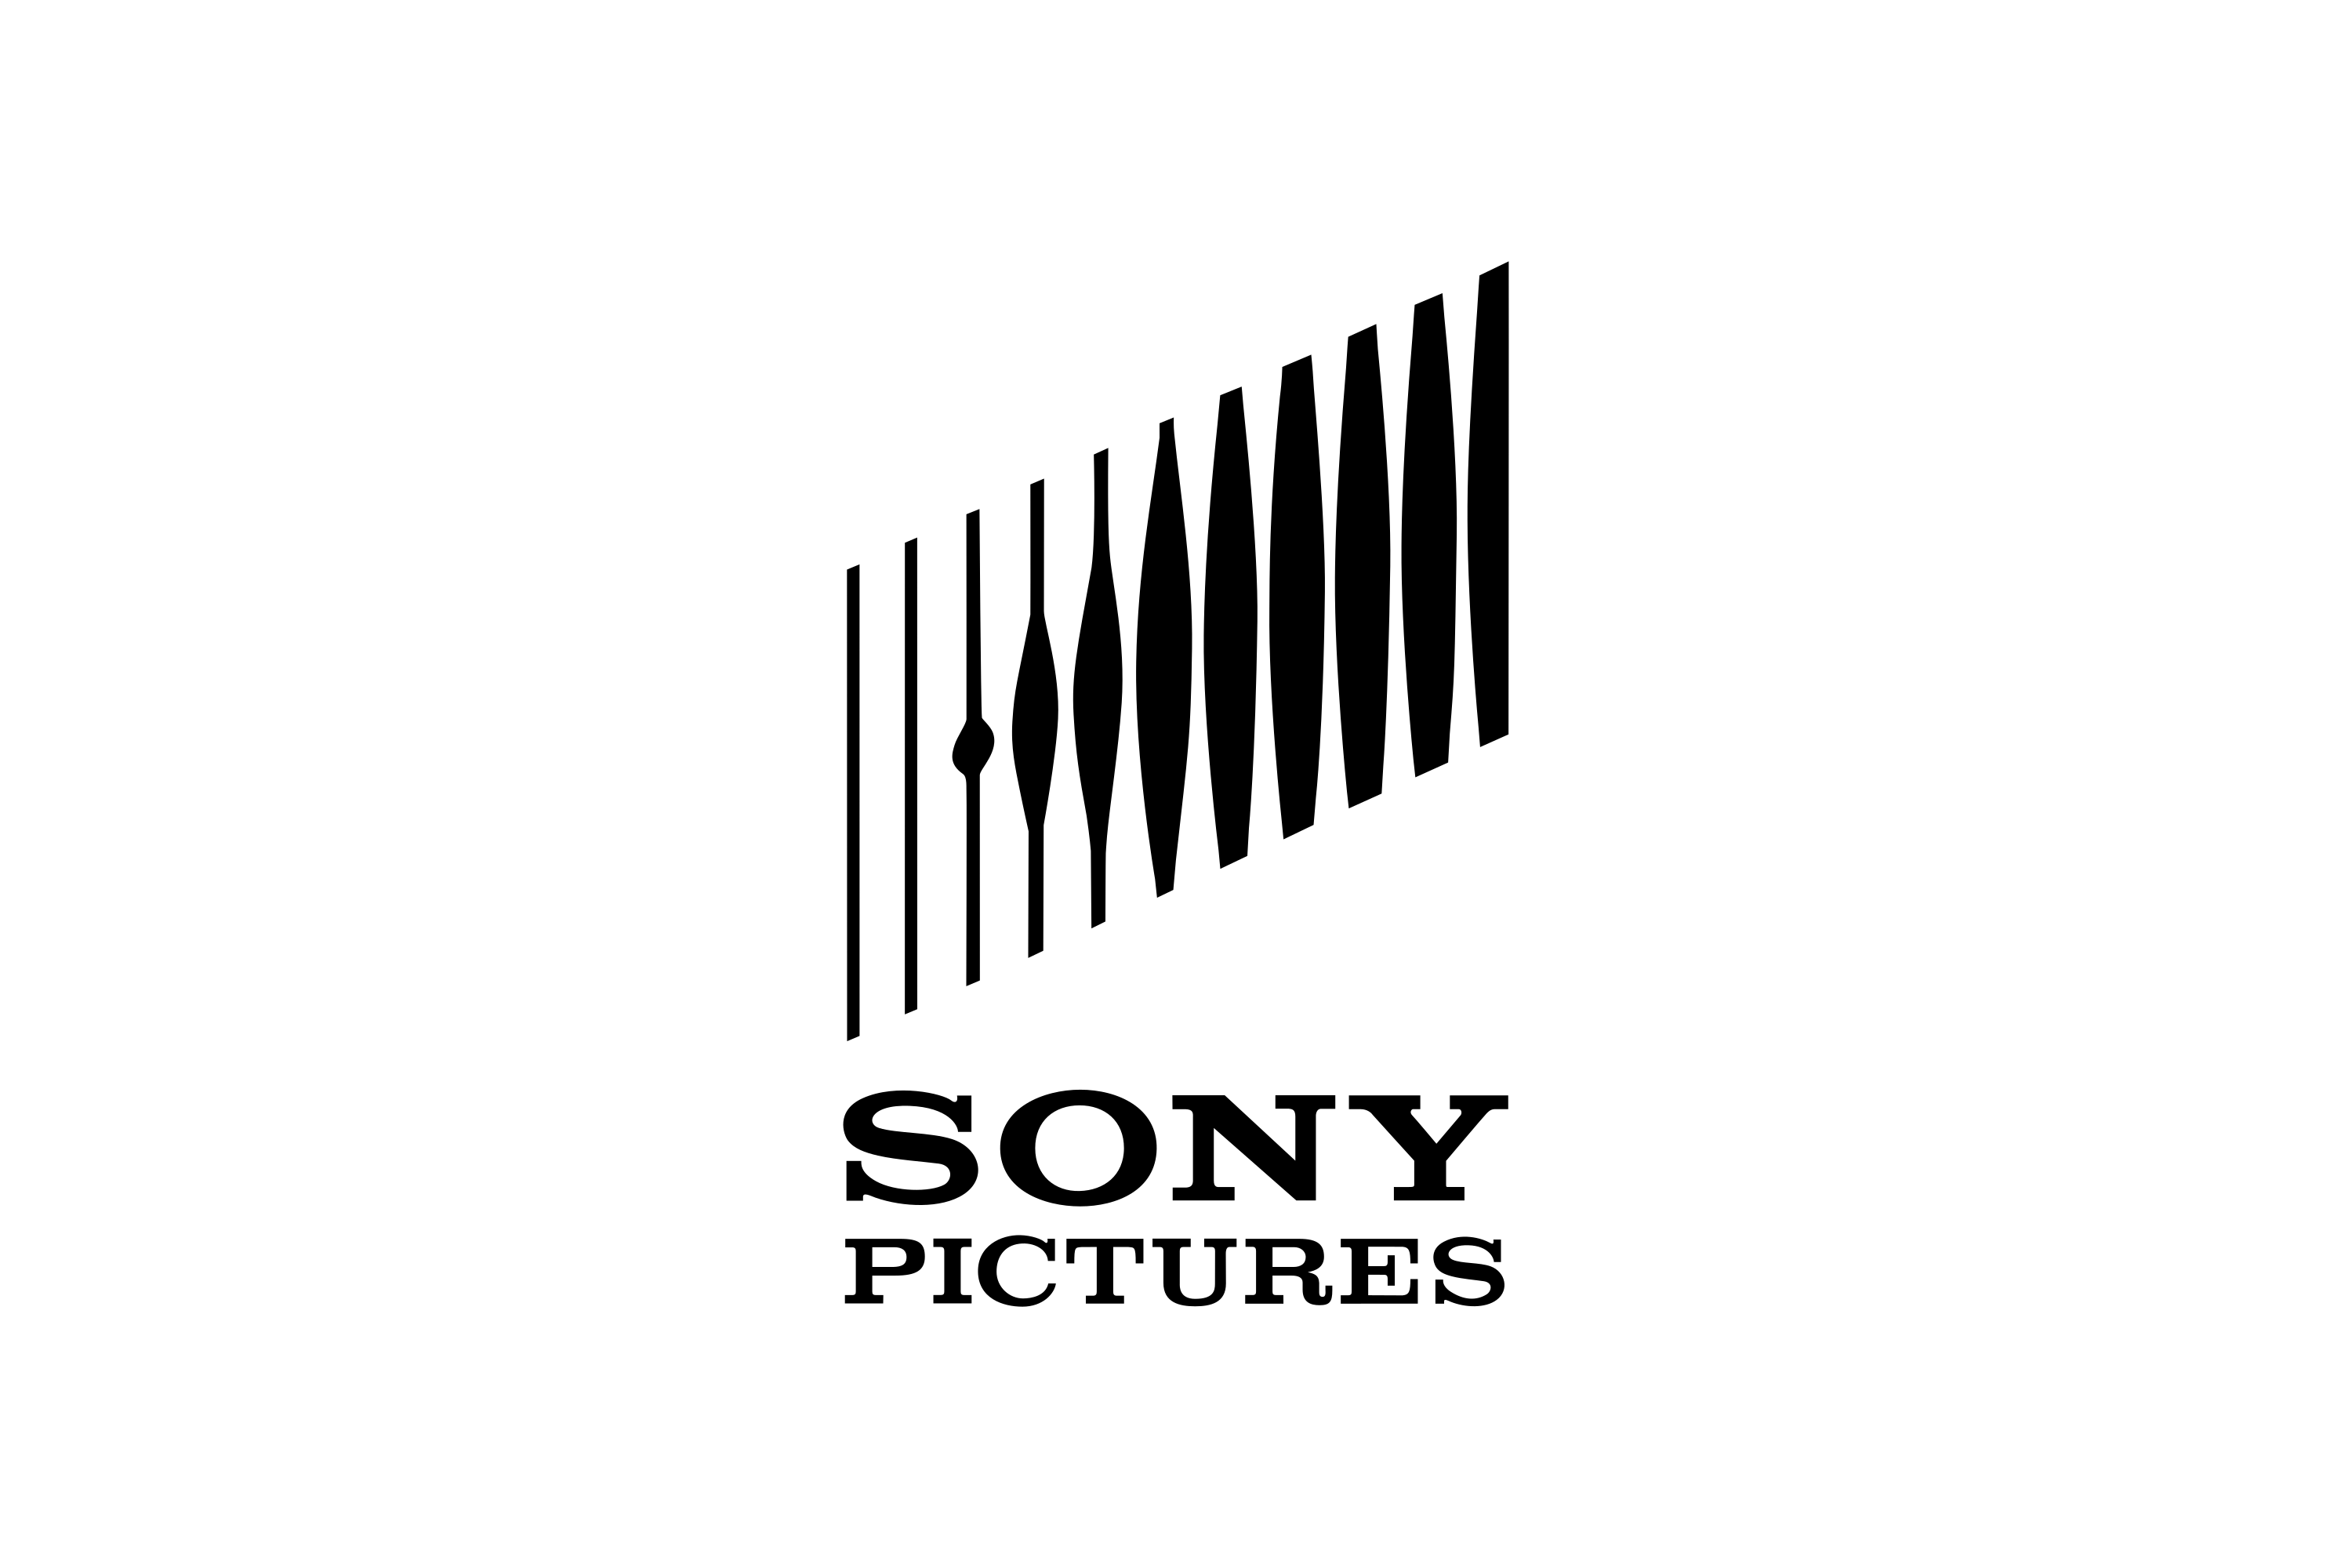 Download Sony Pictures Picture (Sony Pictures Entertainment Motion Picture Group, Columbia TriStar Motion Group, SPMPG) Logo in Vector or PNG File Format - Logo.wine